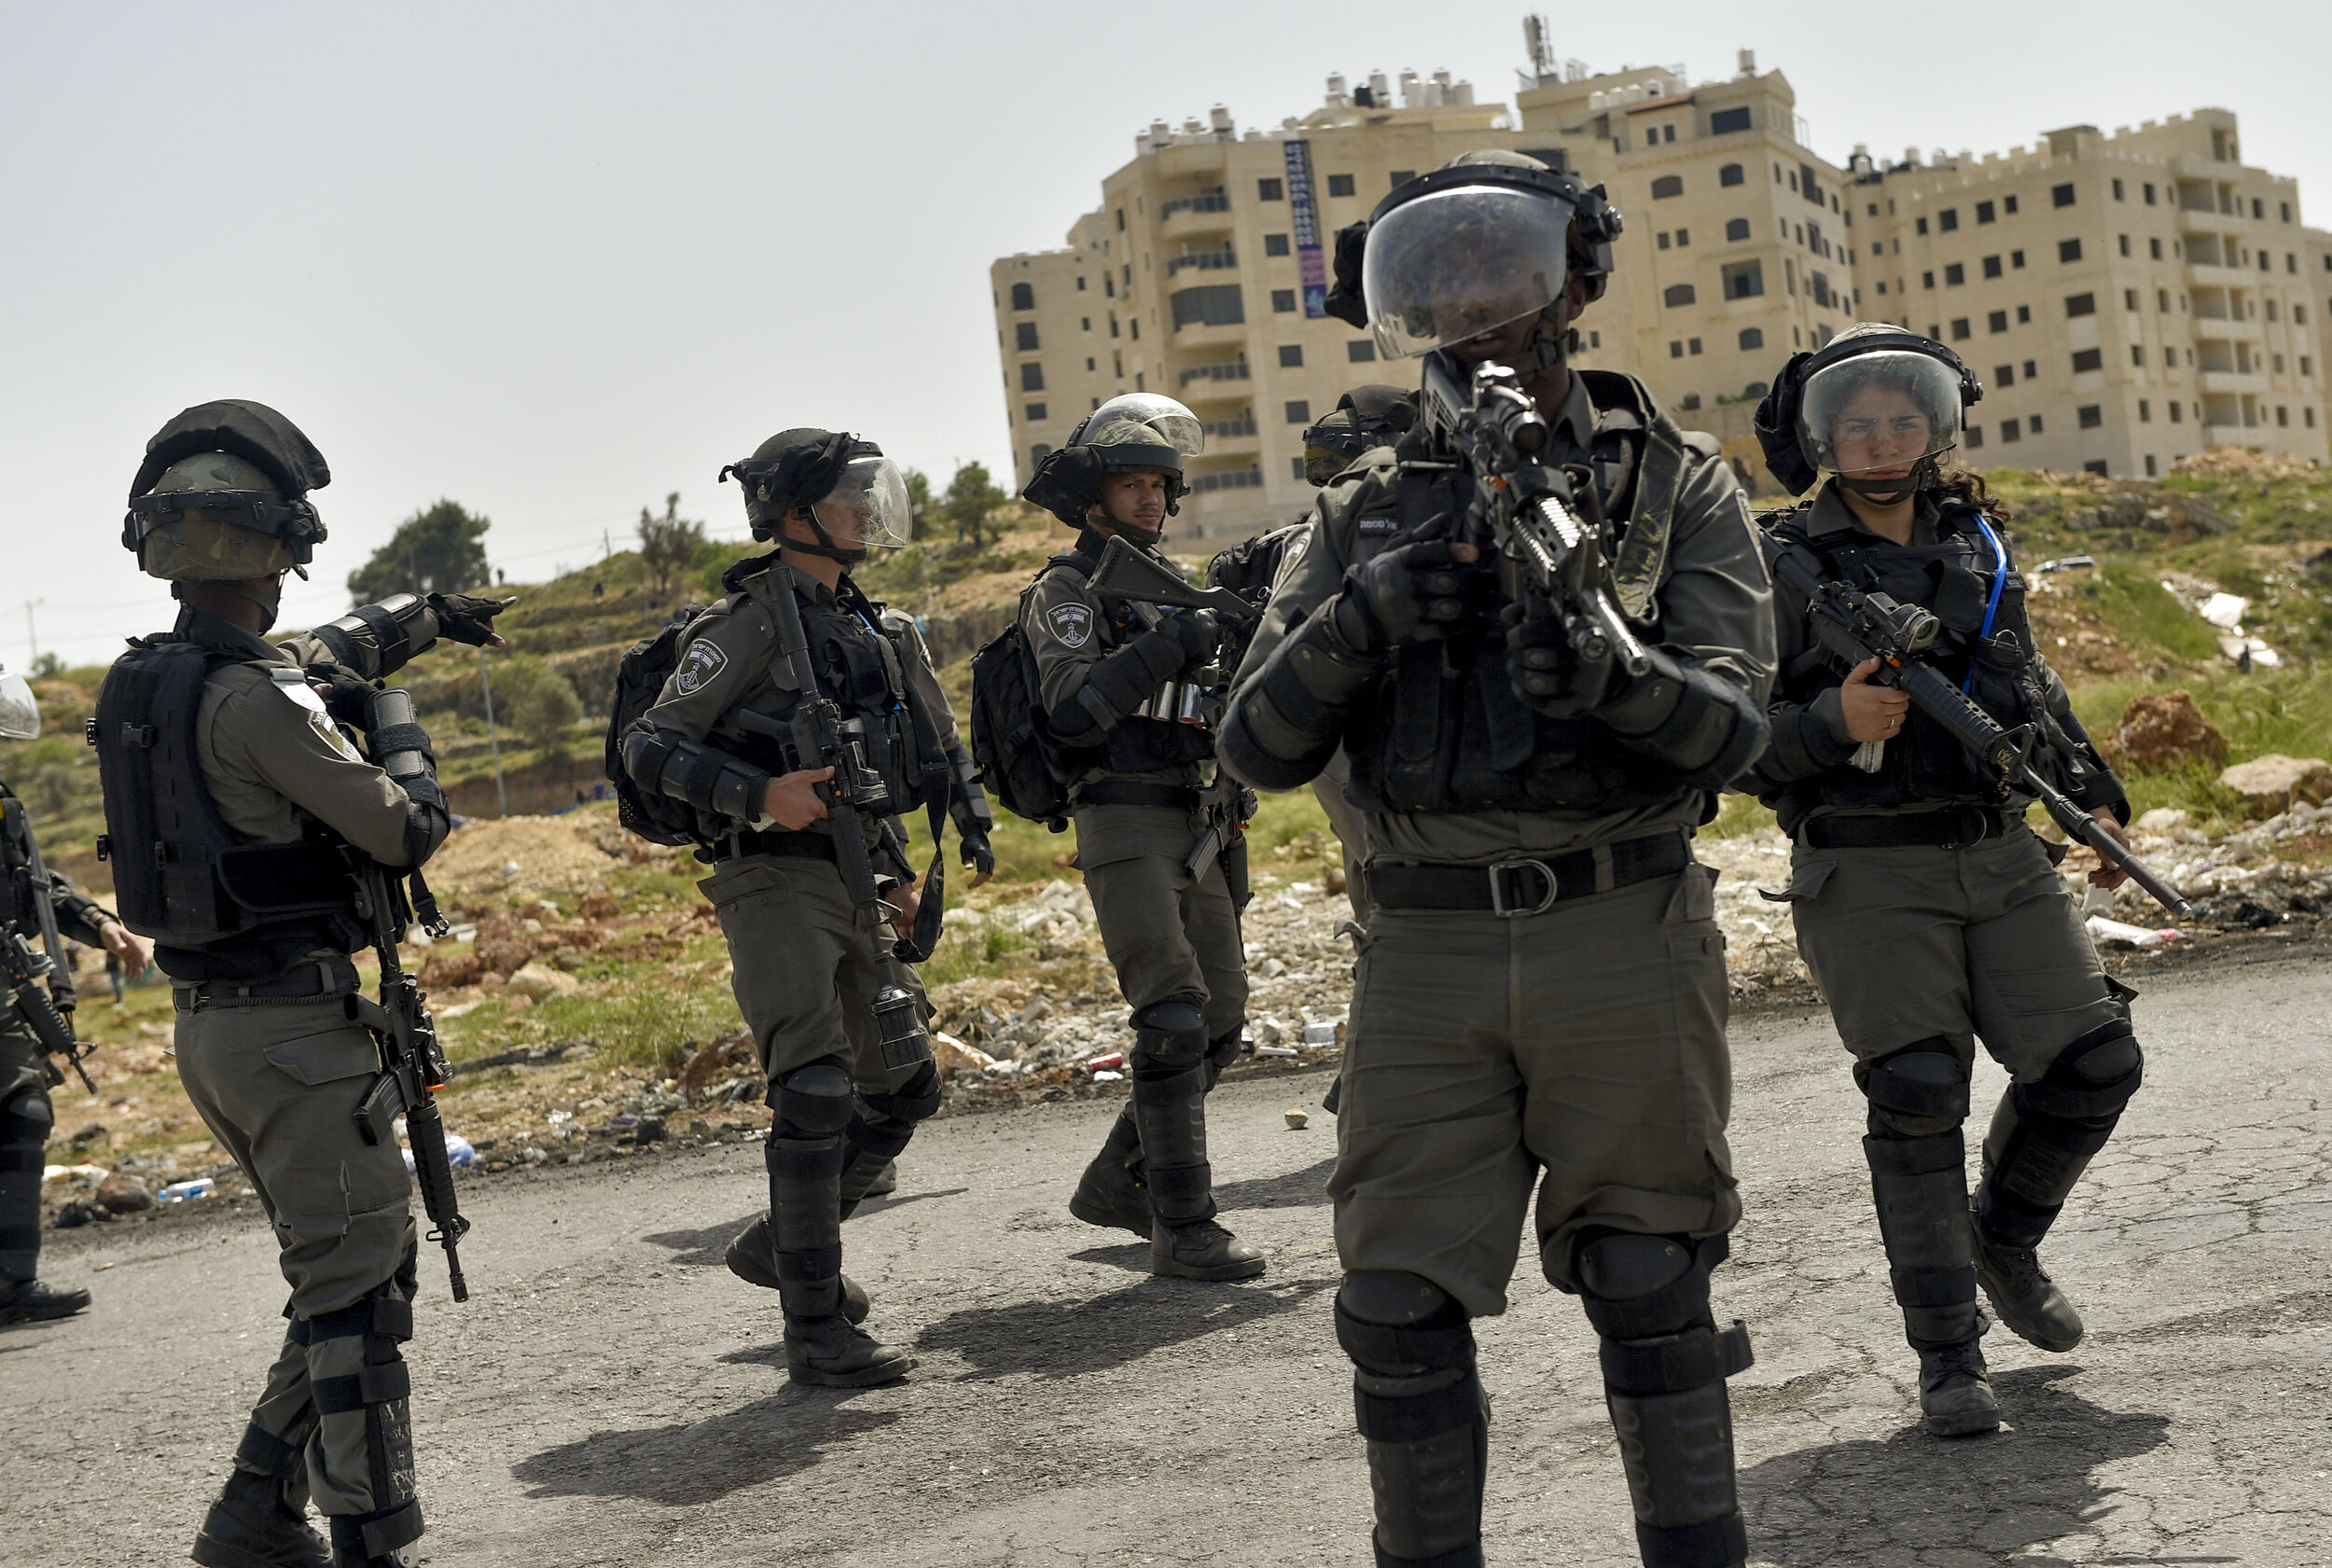  Israeli soldiers clear a street with flashbangs and rubber bullets as they fight to quell a particularly violent clash near Beit-El in the Occupied West Bank. 